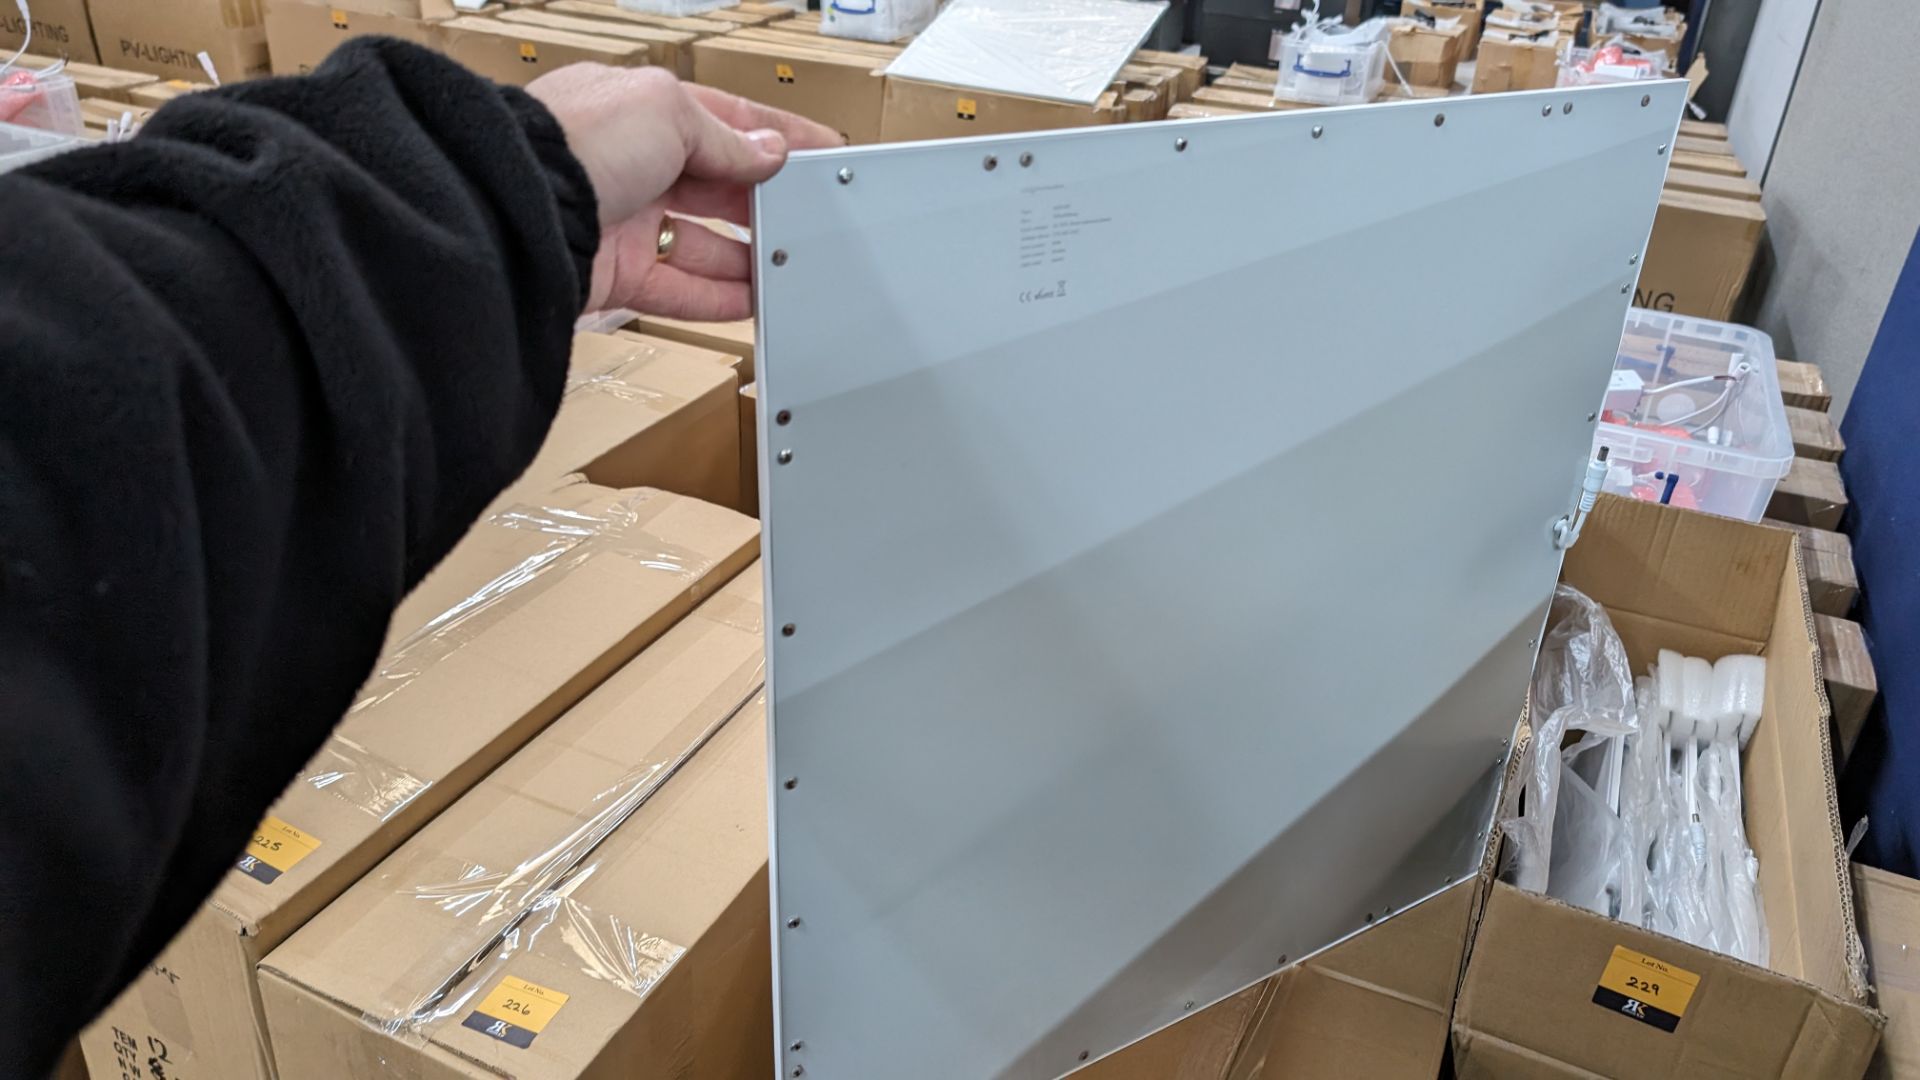 8 off 595mm x 595mm 4000k 45w LED lighting panels, each including driver - 1 carton - Image 4 of 5